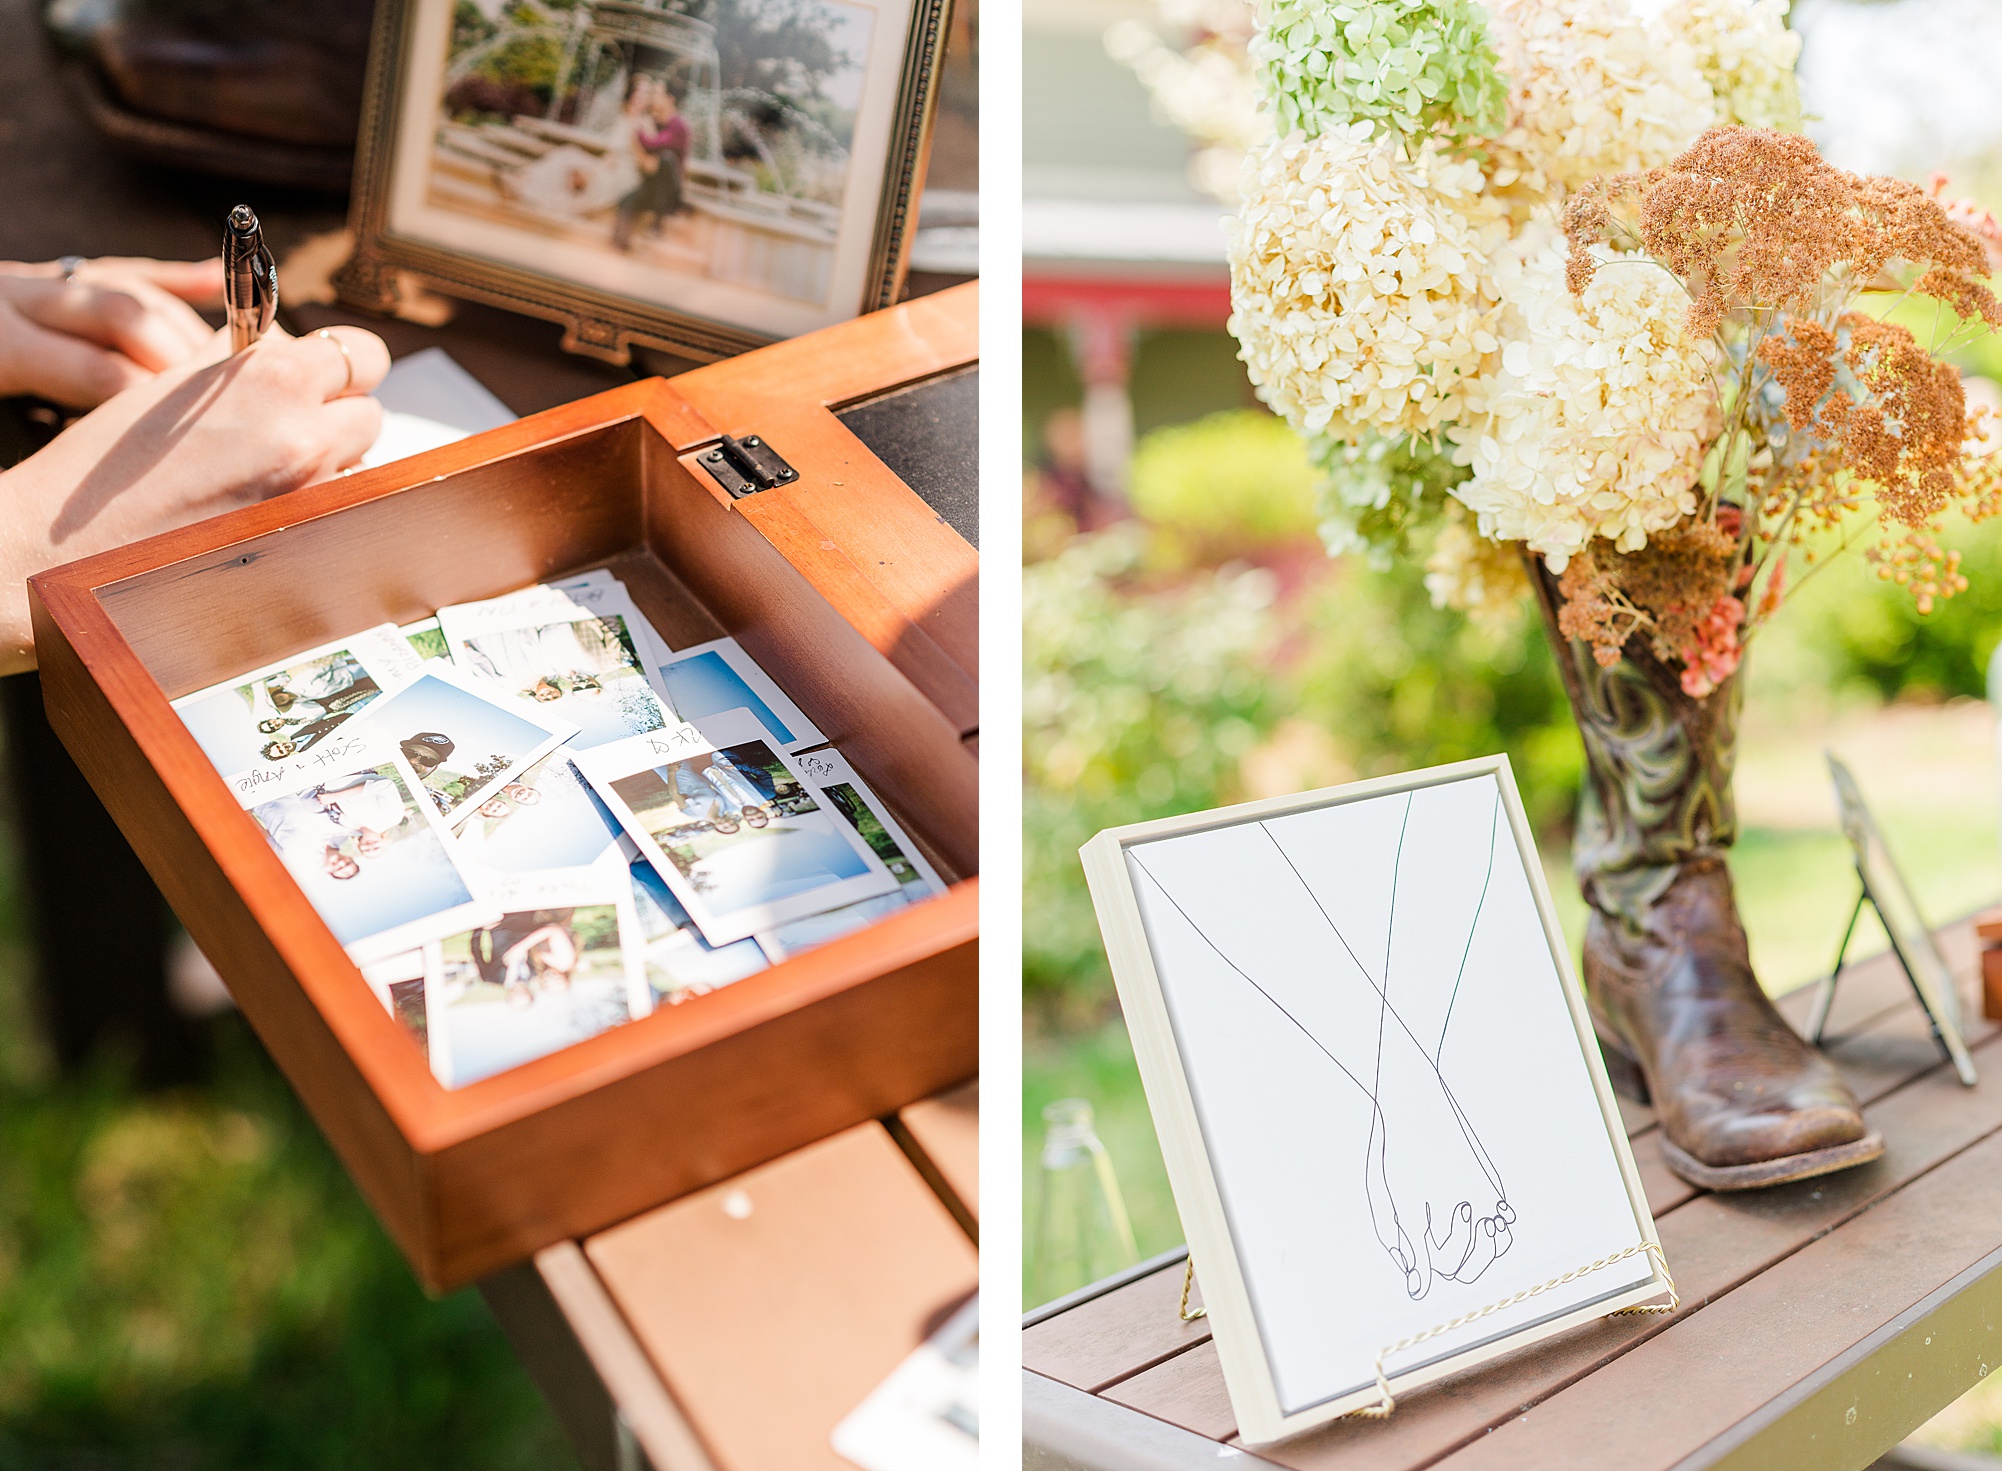 Outdoor Lunenburg Cove Wedding with Eco-Friendly Decor by Charlottesville Wedding Photographer